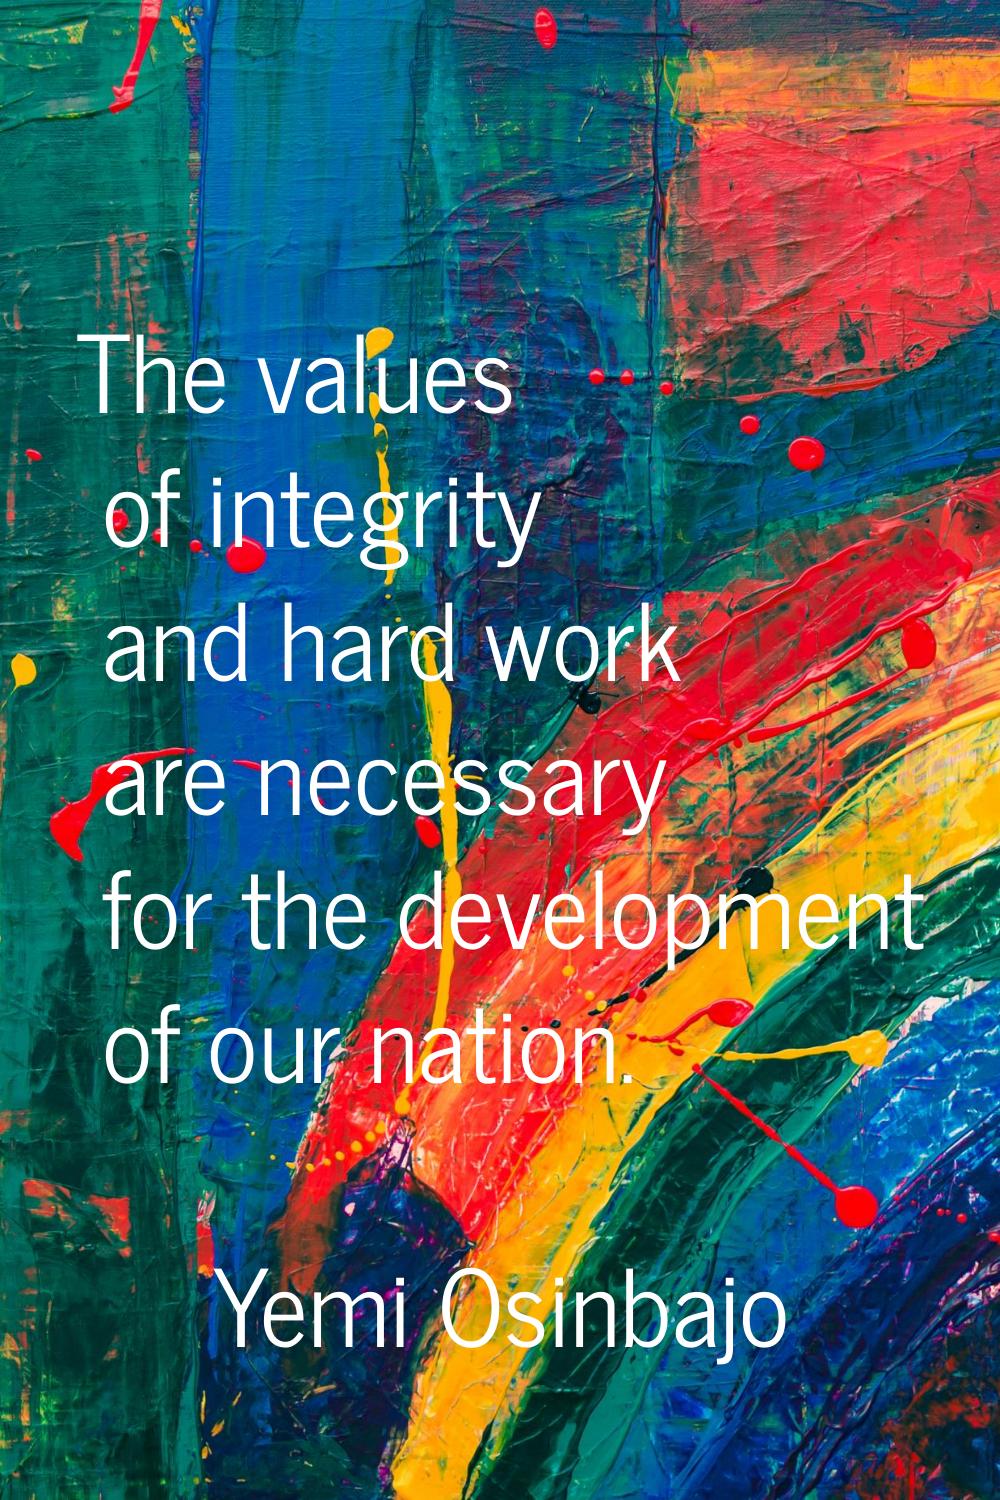 The values of integrity and hard work are necessary for the development of our nation.